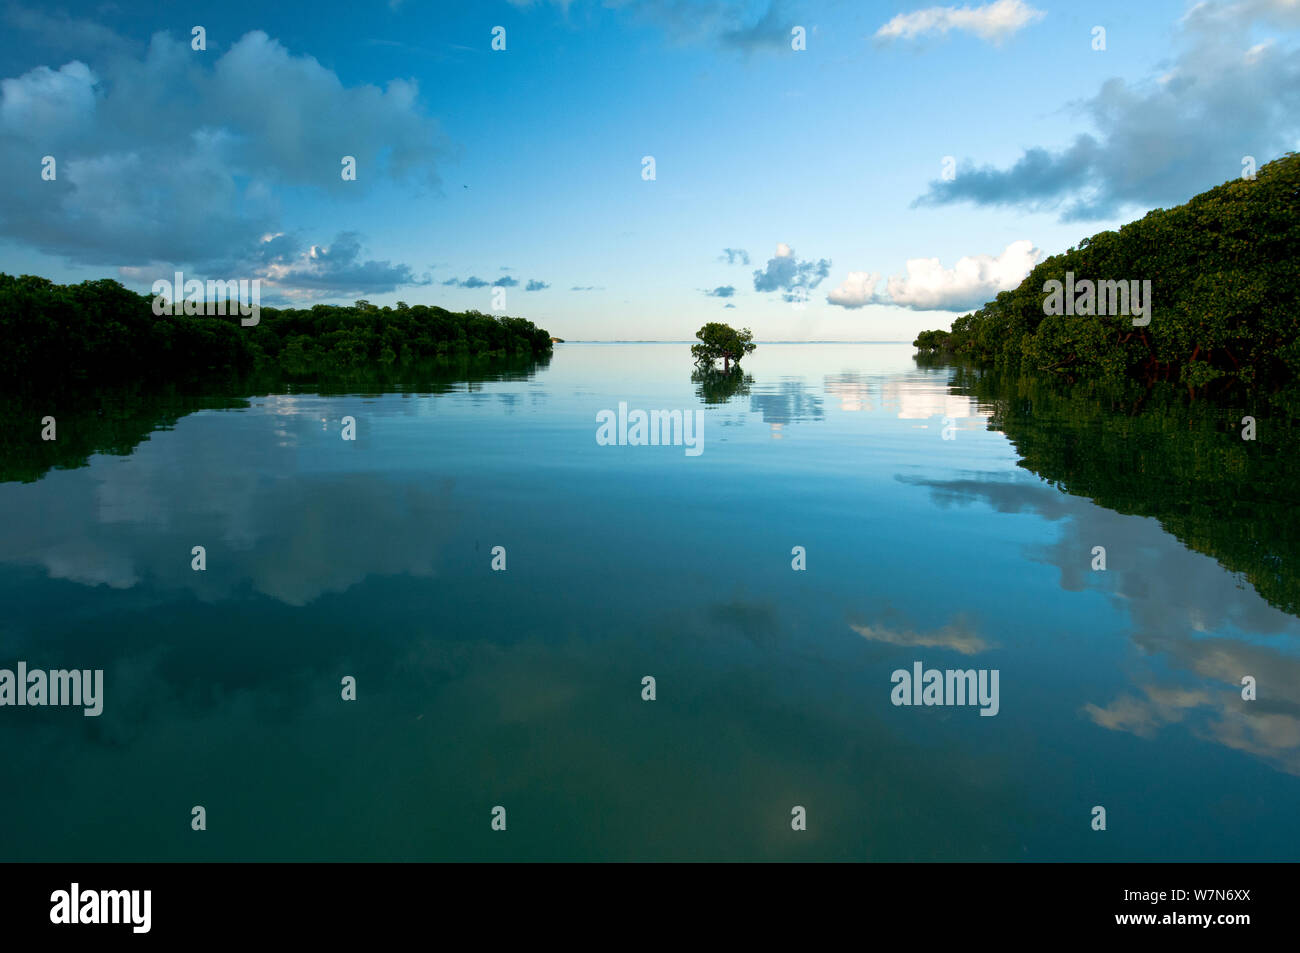 Mangrove forests line the edges of the lagoon and line the channels leading in to the lagoon, Aldabra Atoll, Seychelles, Indian Ocean Stock Photo